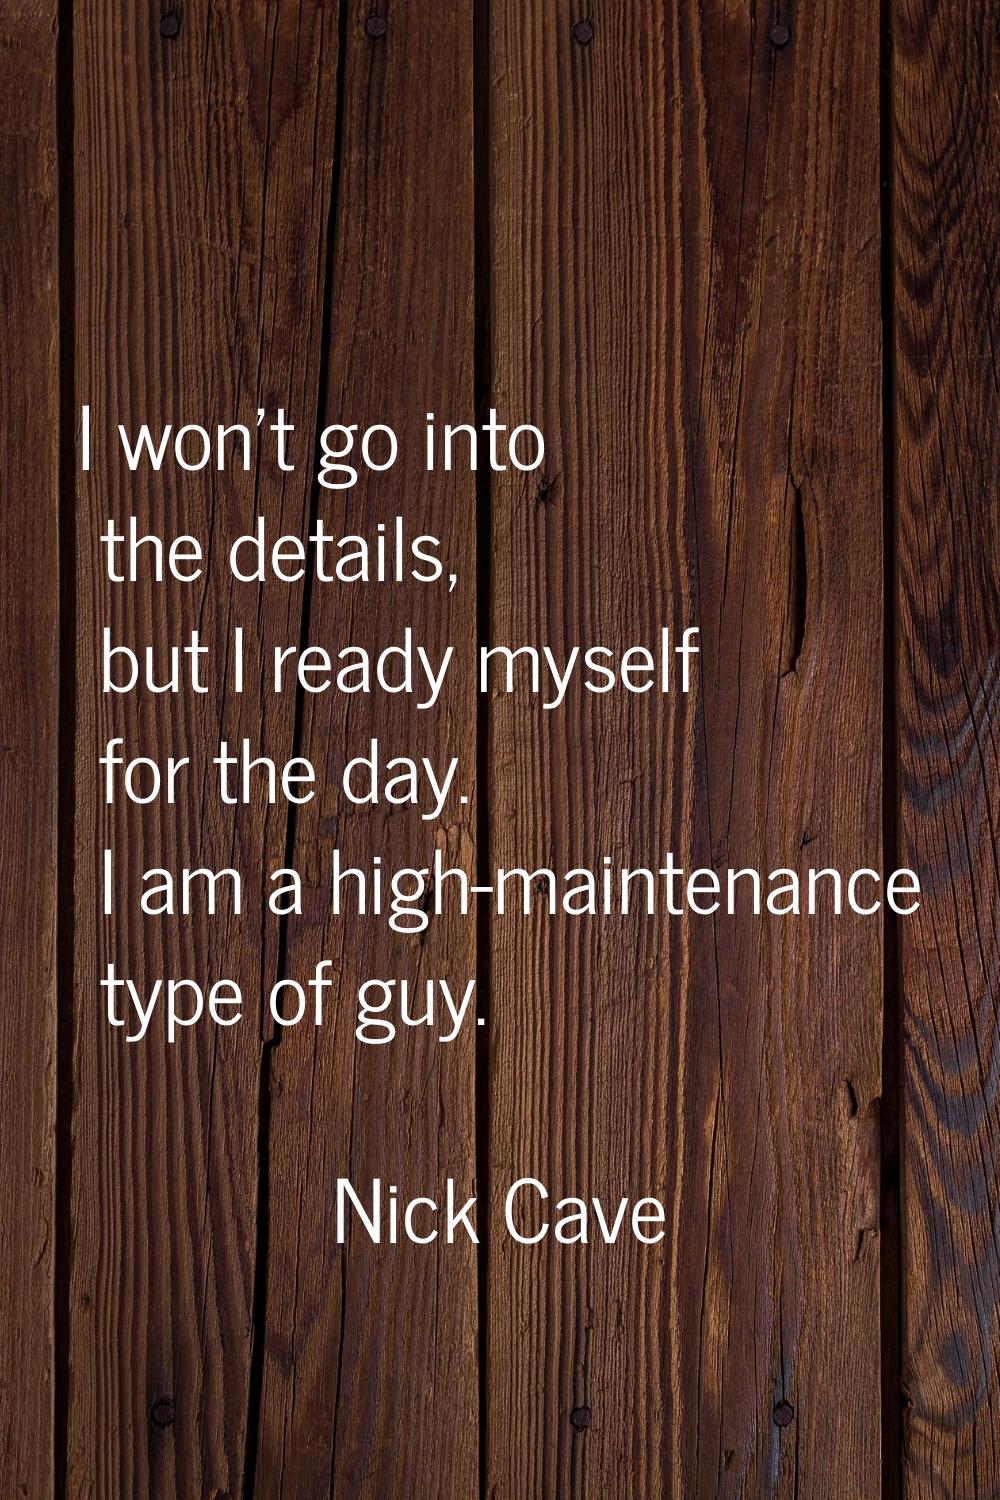 I won't go into the details, but I ready myself for the day. I am a high-maintenance type of guy.